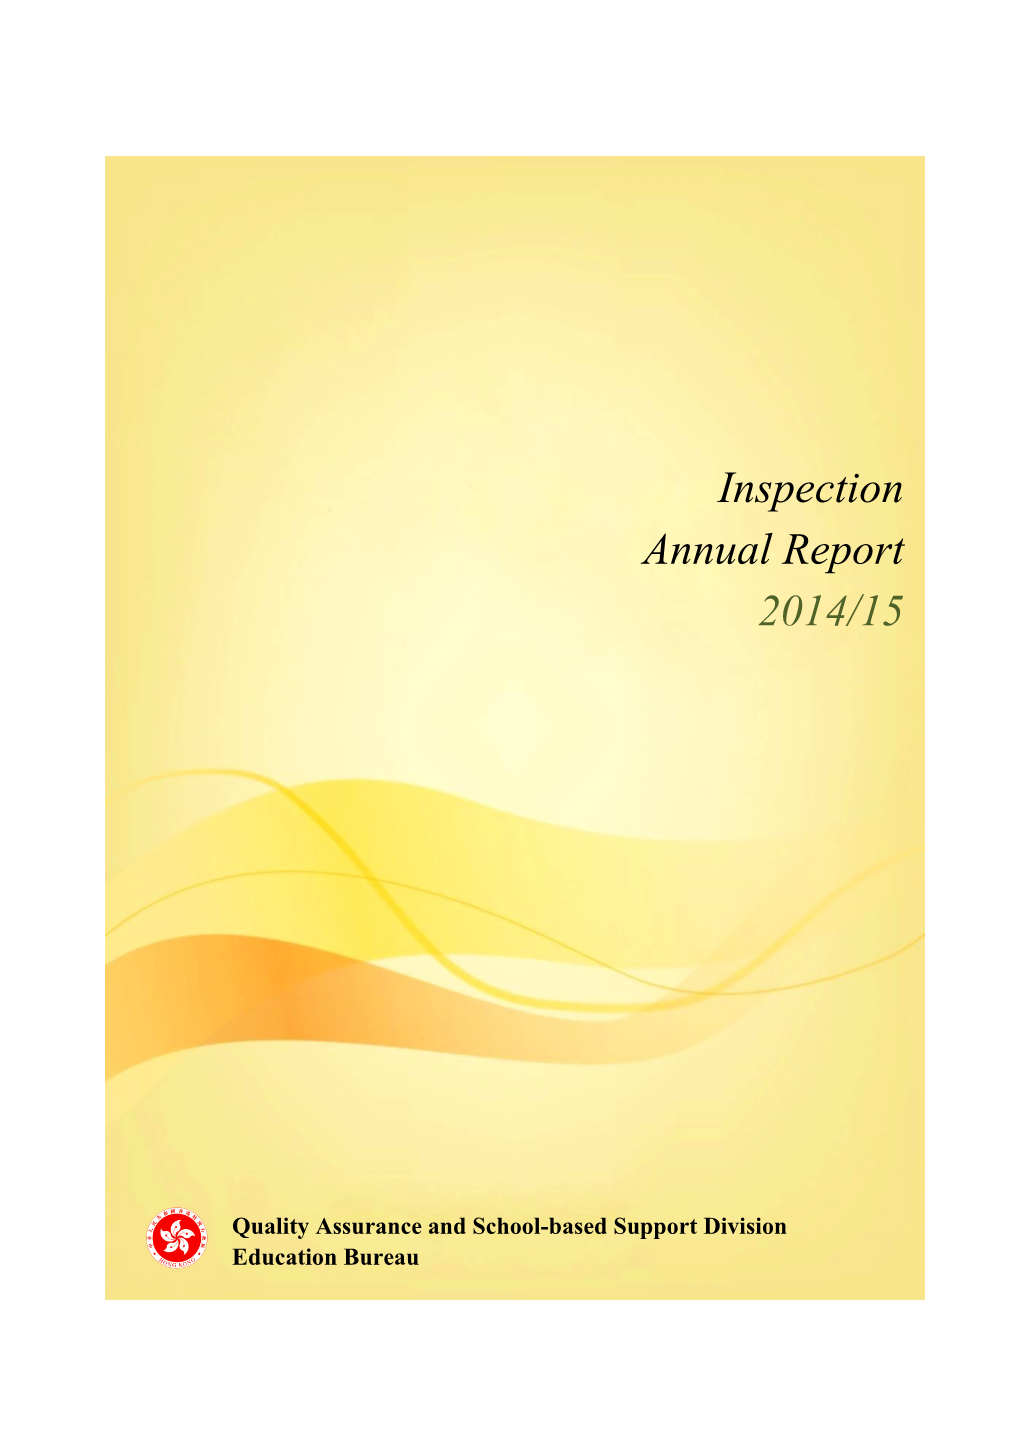 Inspection Annual Report 2014/15